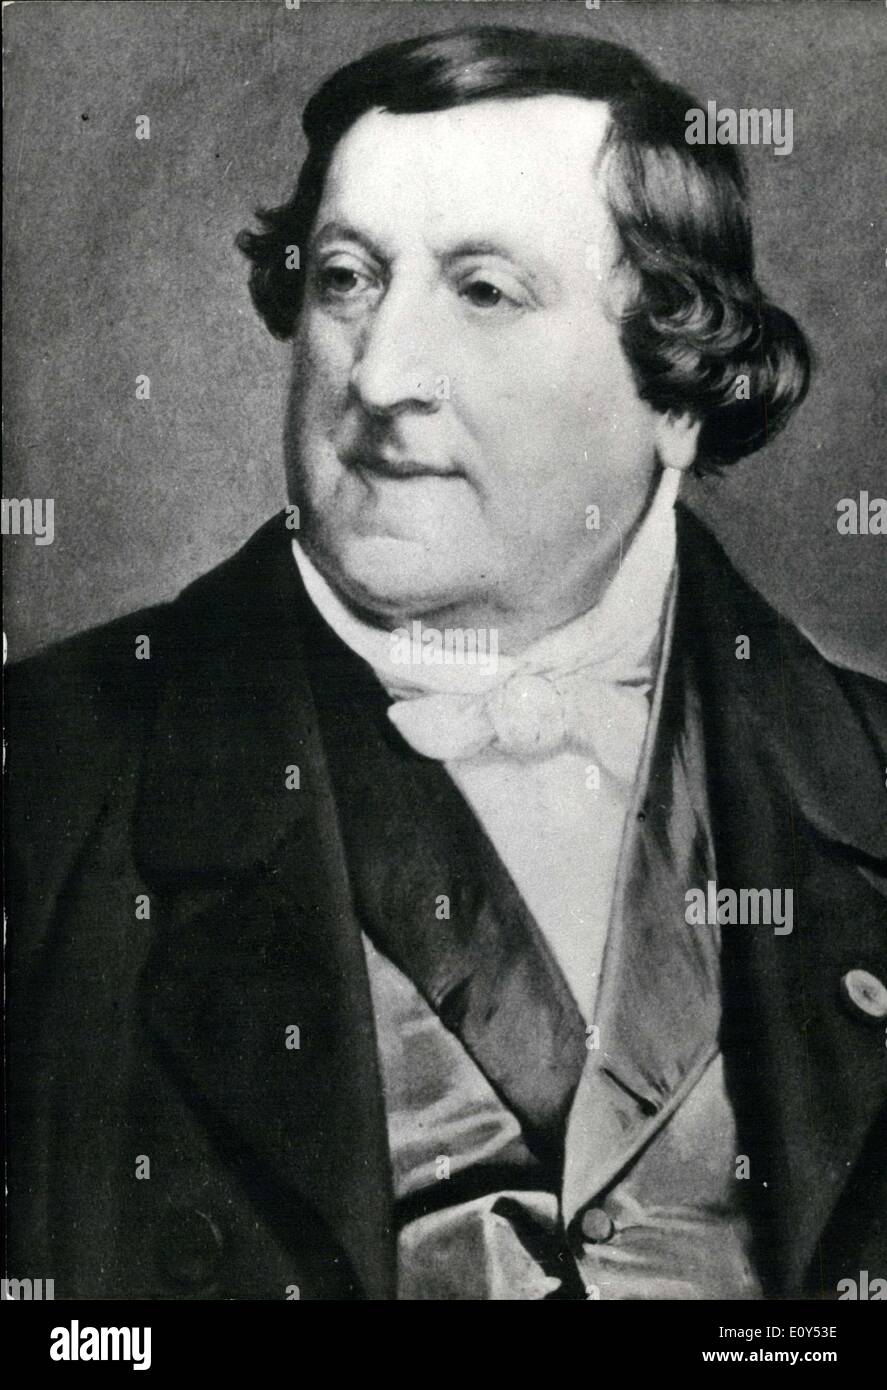 Nov. 08, 1968 - Pictured is a portrait of Italian composer Gioacchino Rossini. It was printed in memorial on the 100th anniversary of his death. Stock Photo